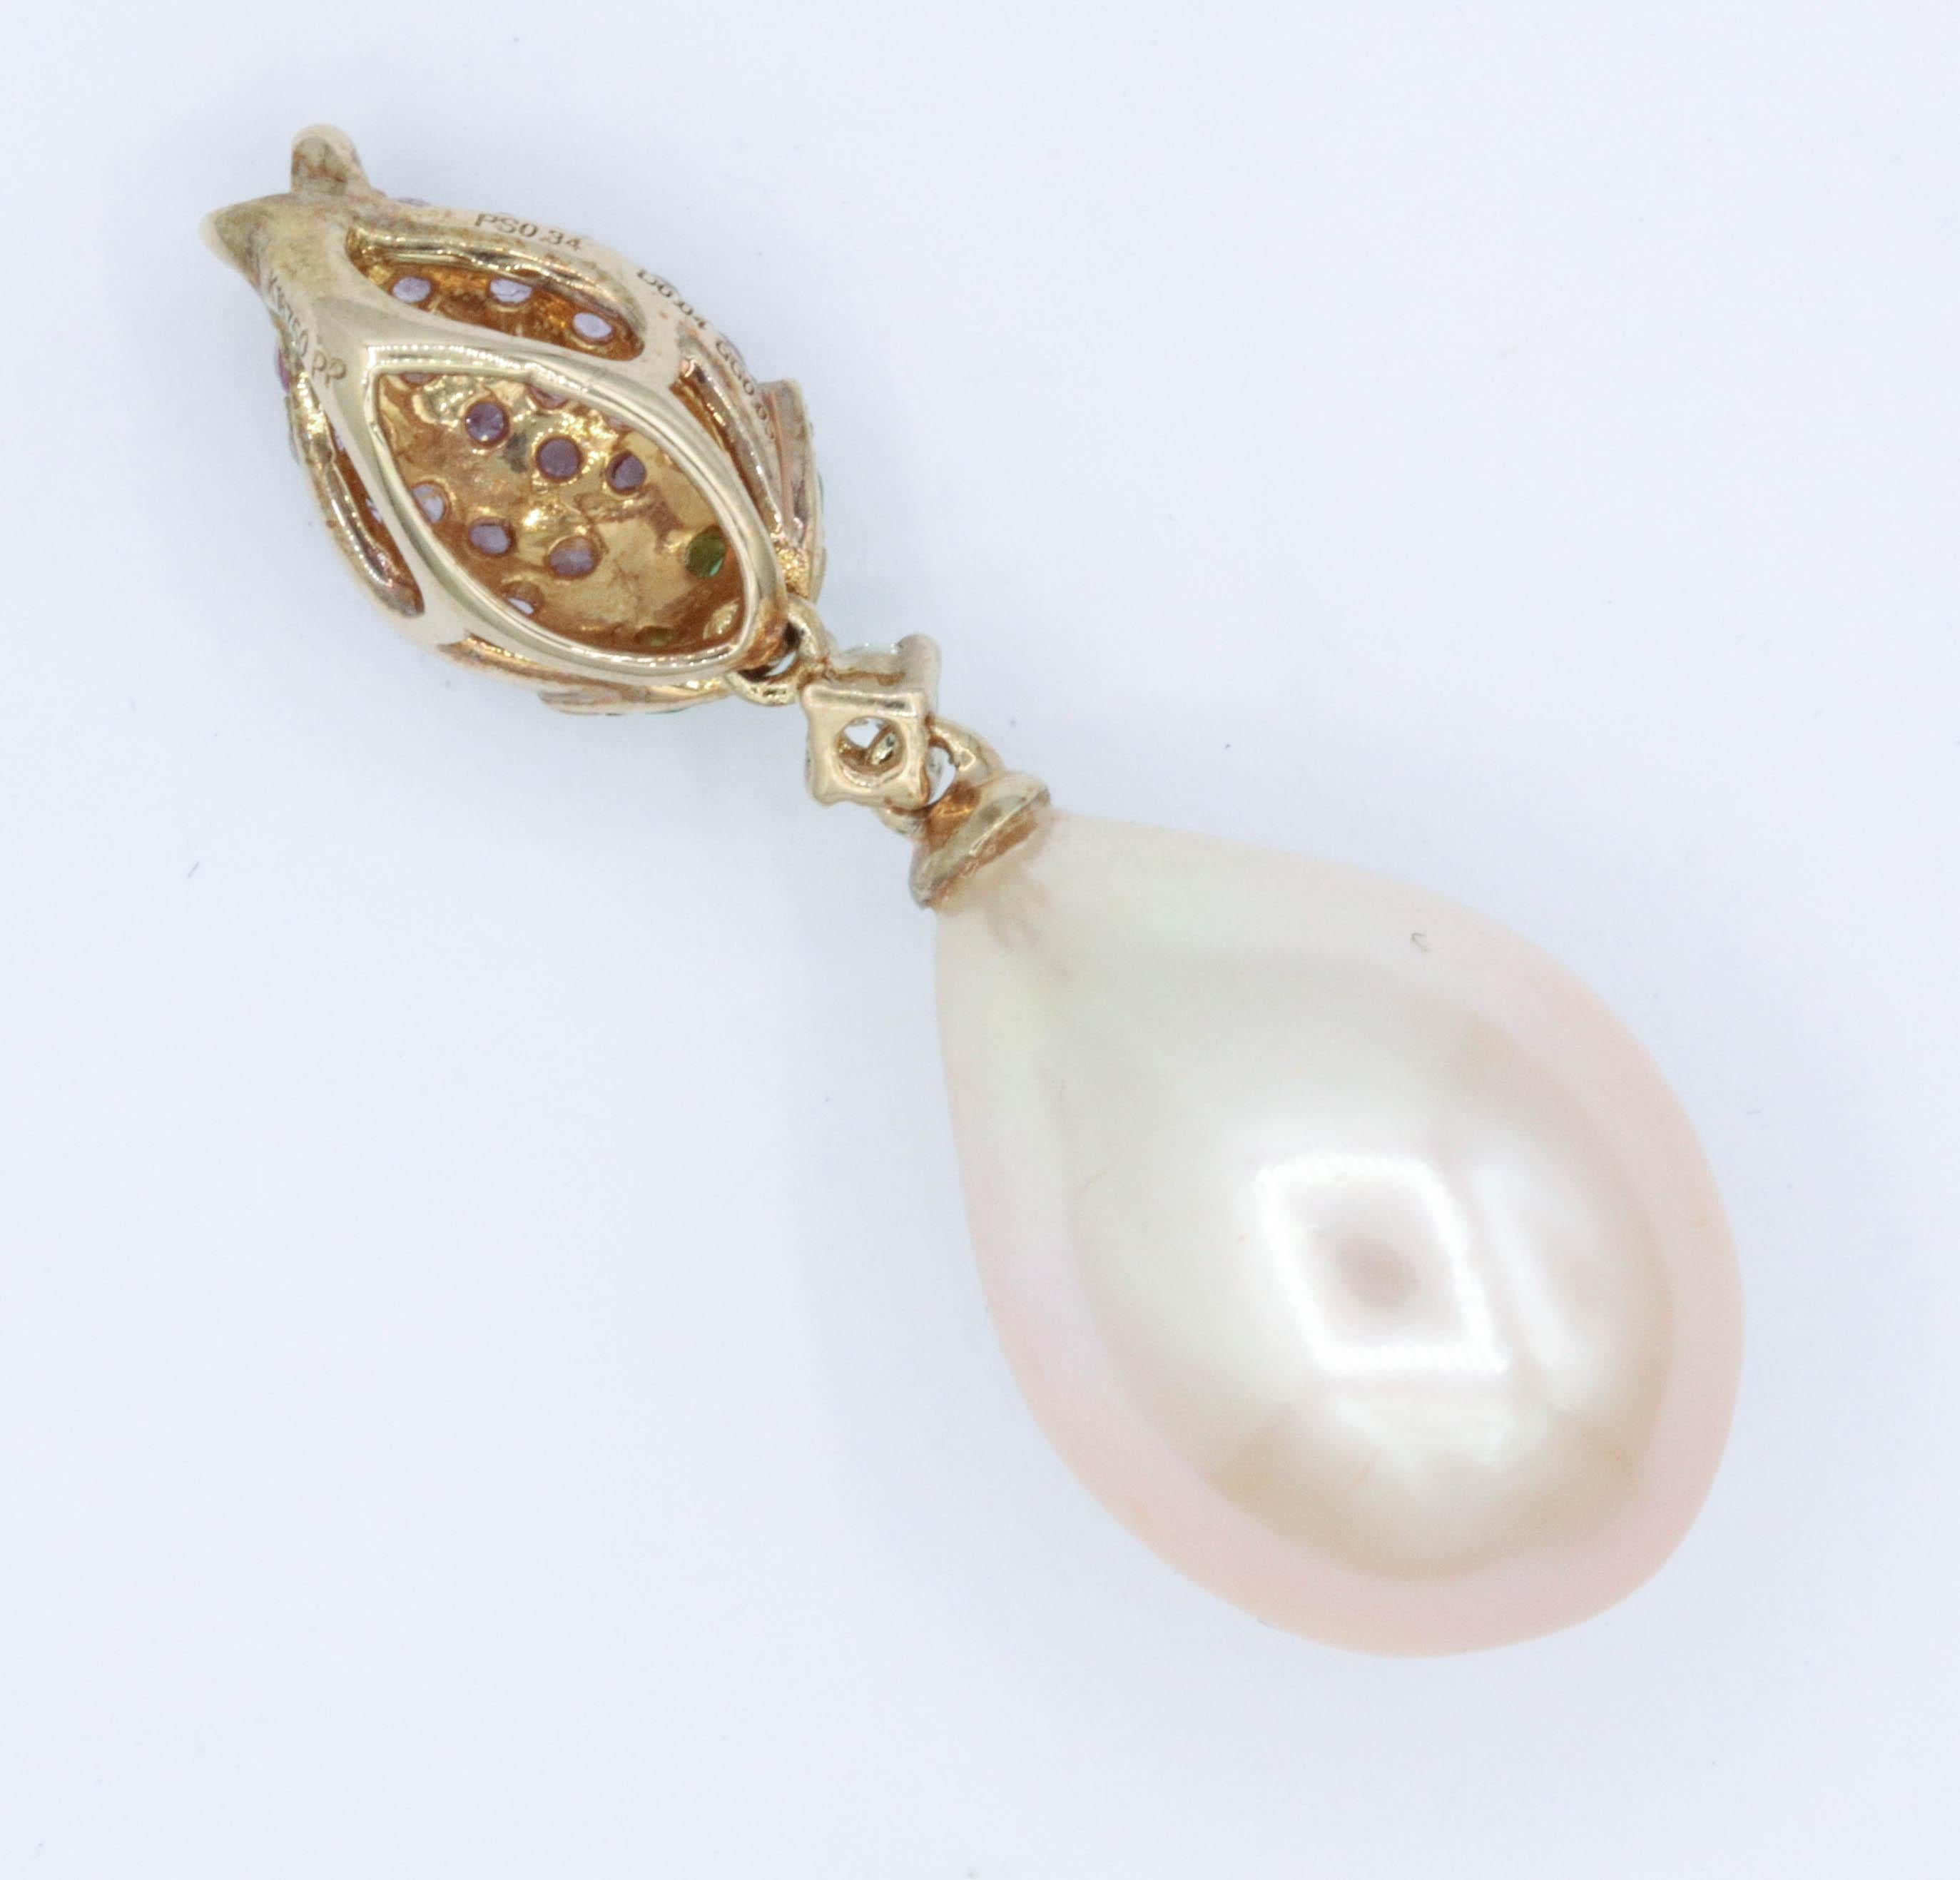 11.8 mm pearl
18K yellow gold
1.25